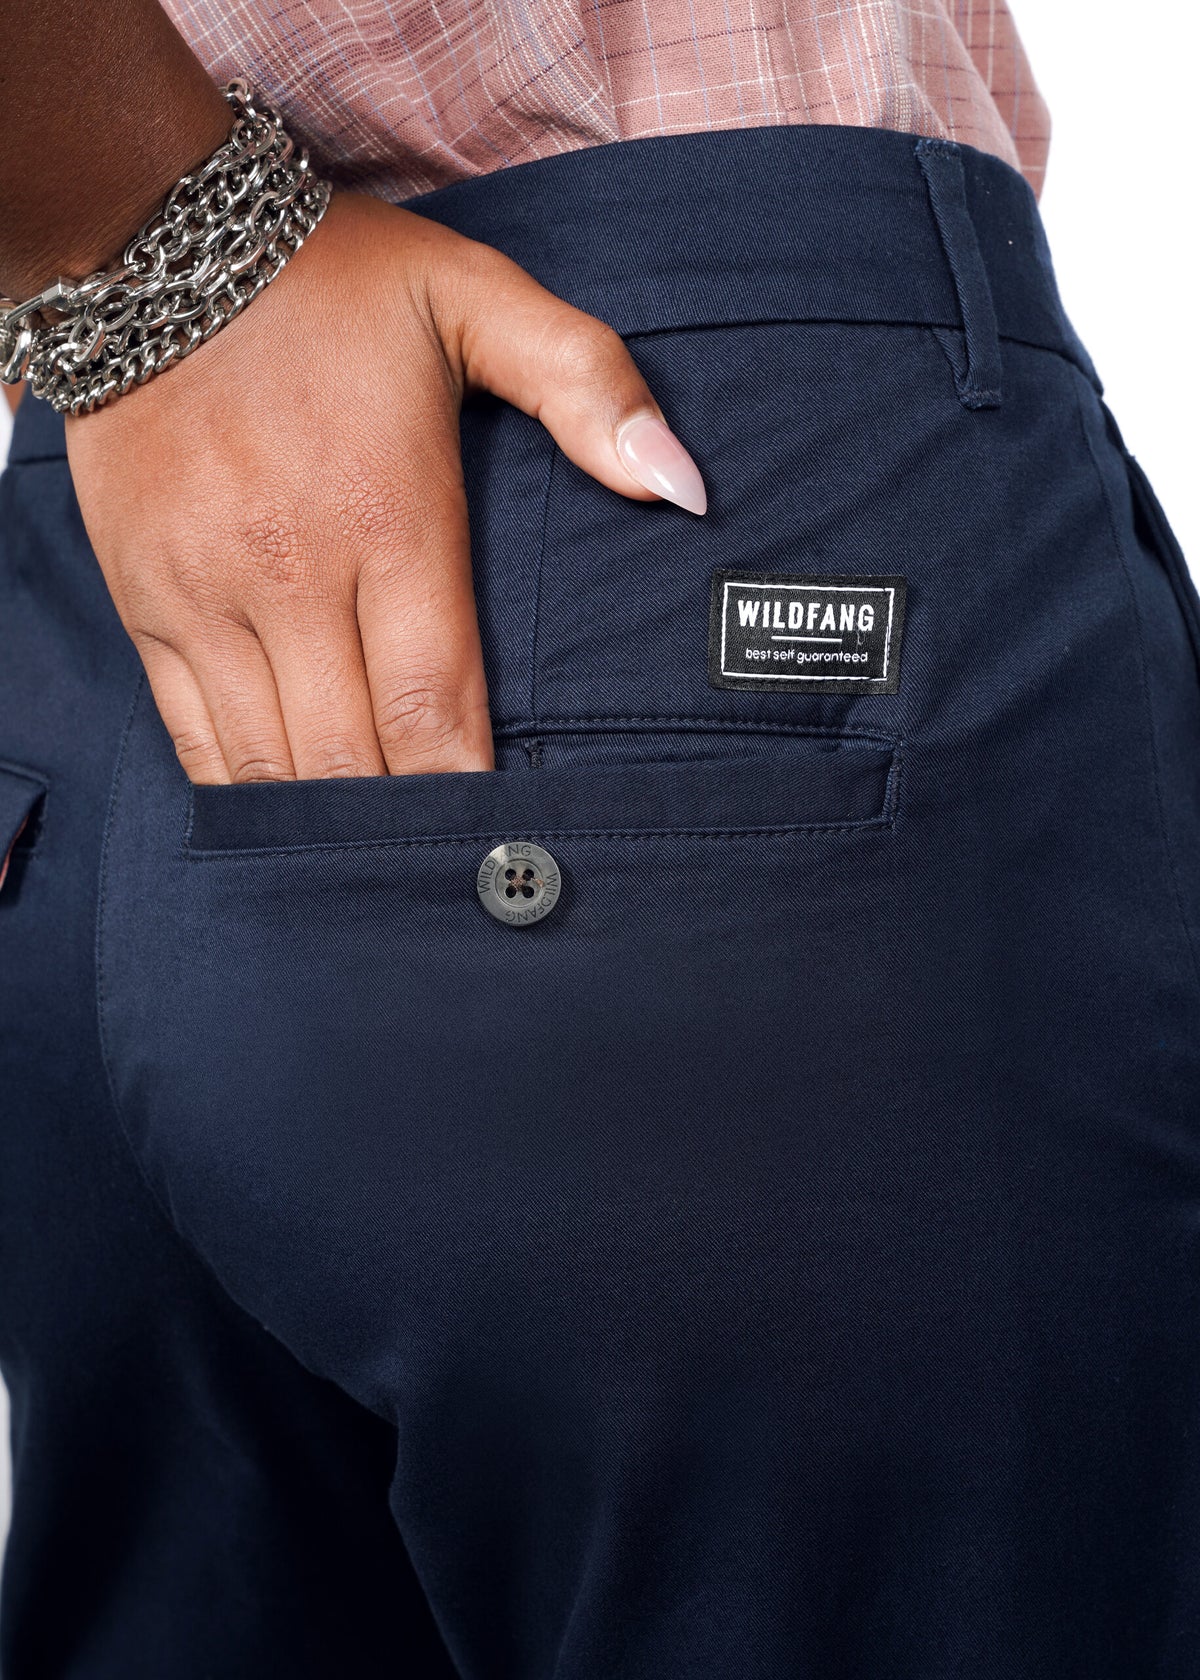 The Essential Trouser